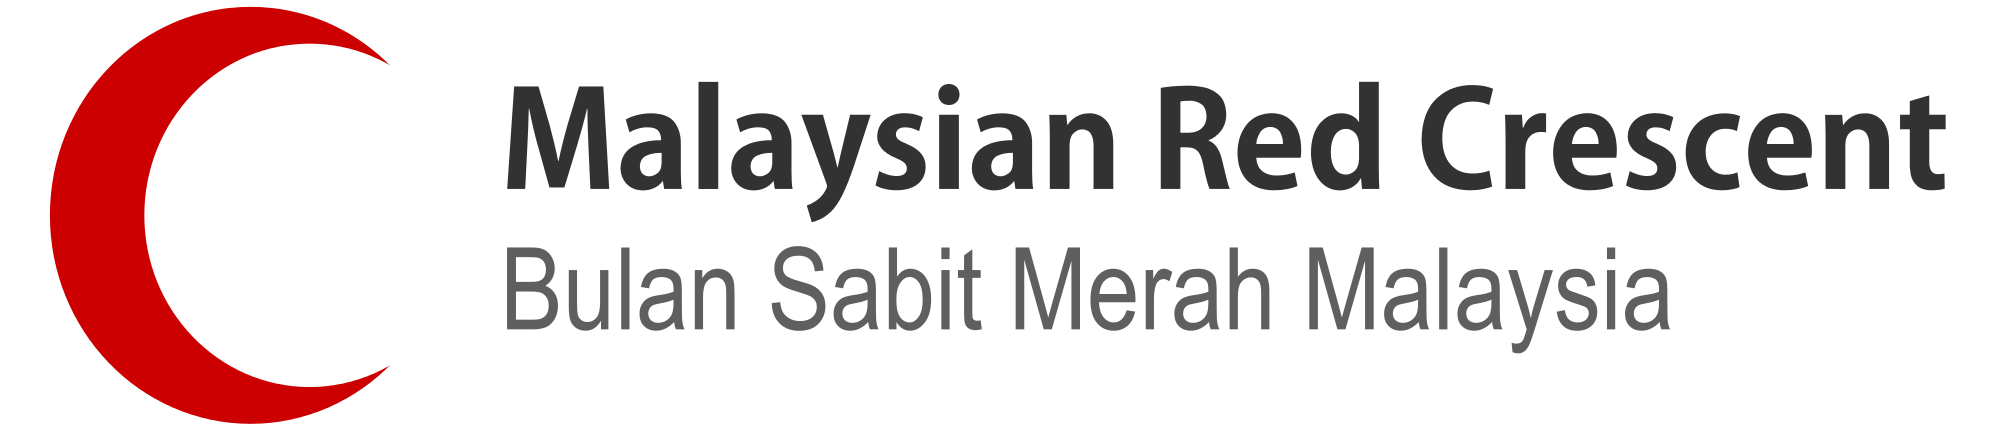 Red Crescent Logo - File:Logo of the Malaysian Red Crescent.svg - Wikimedia Commons